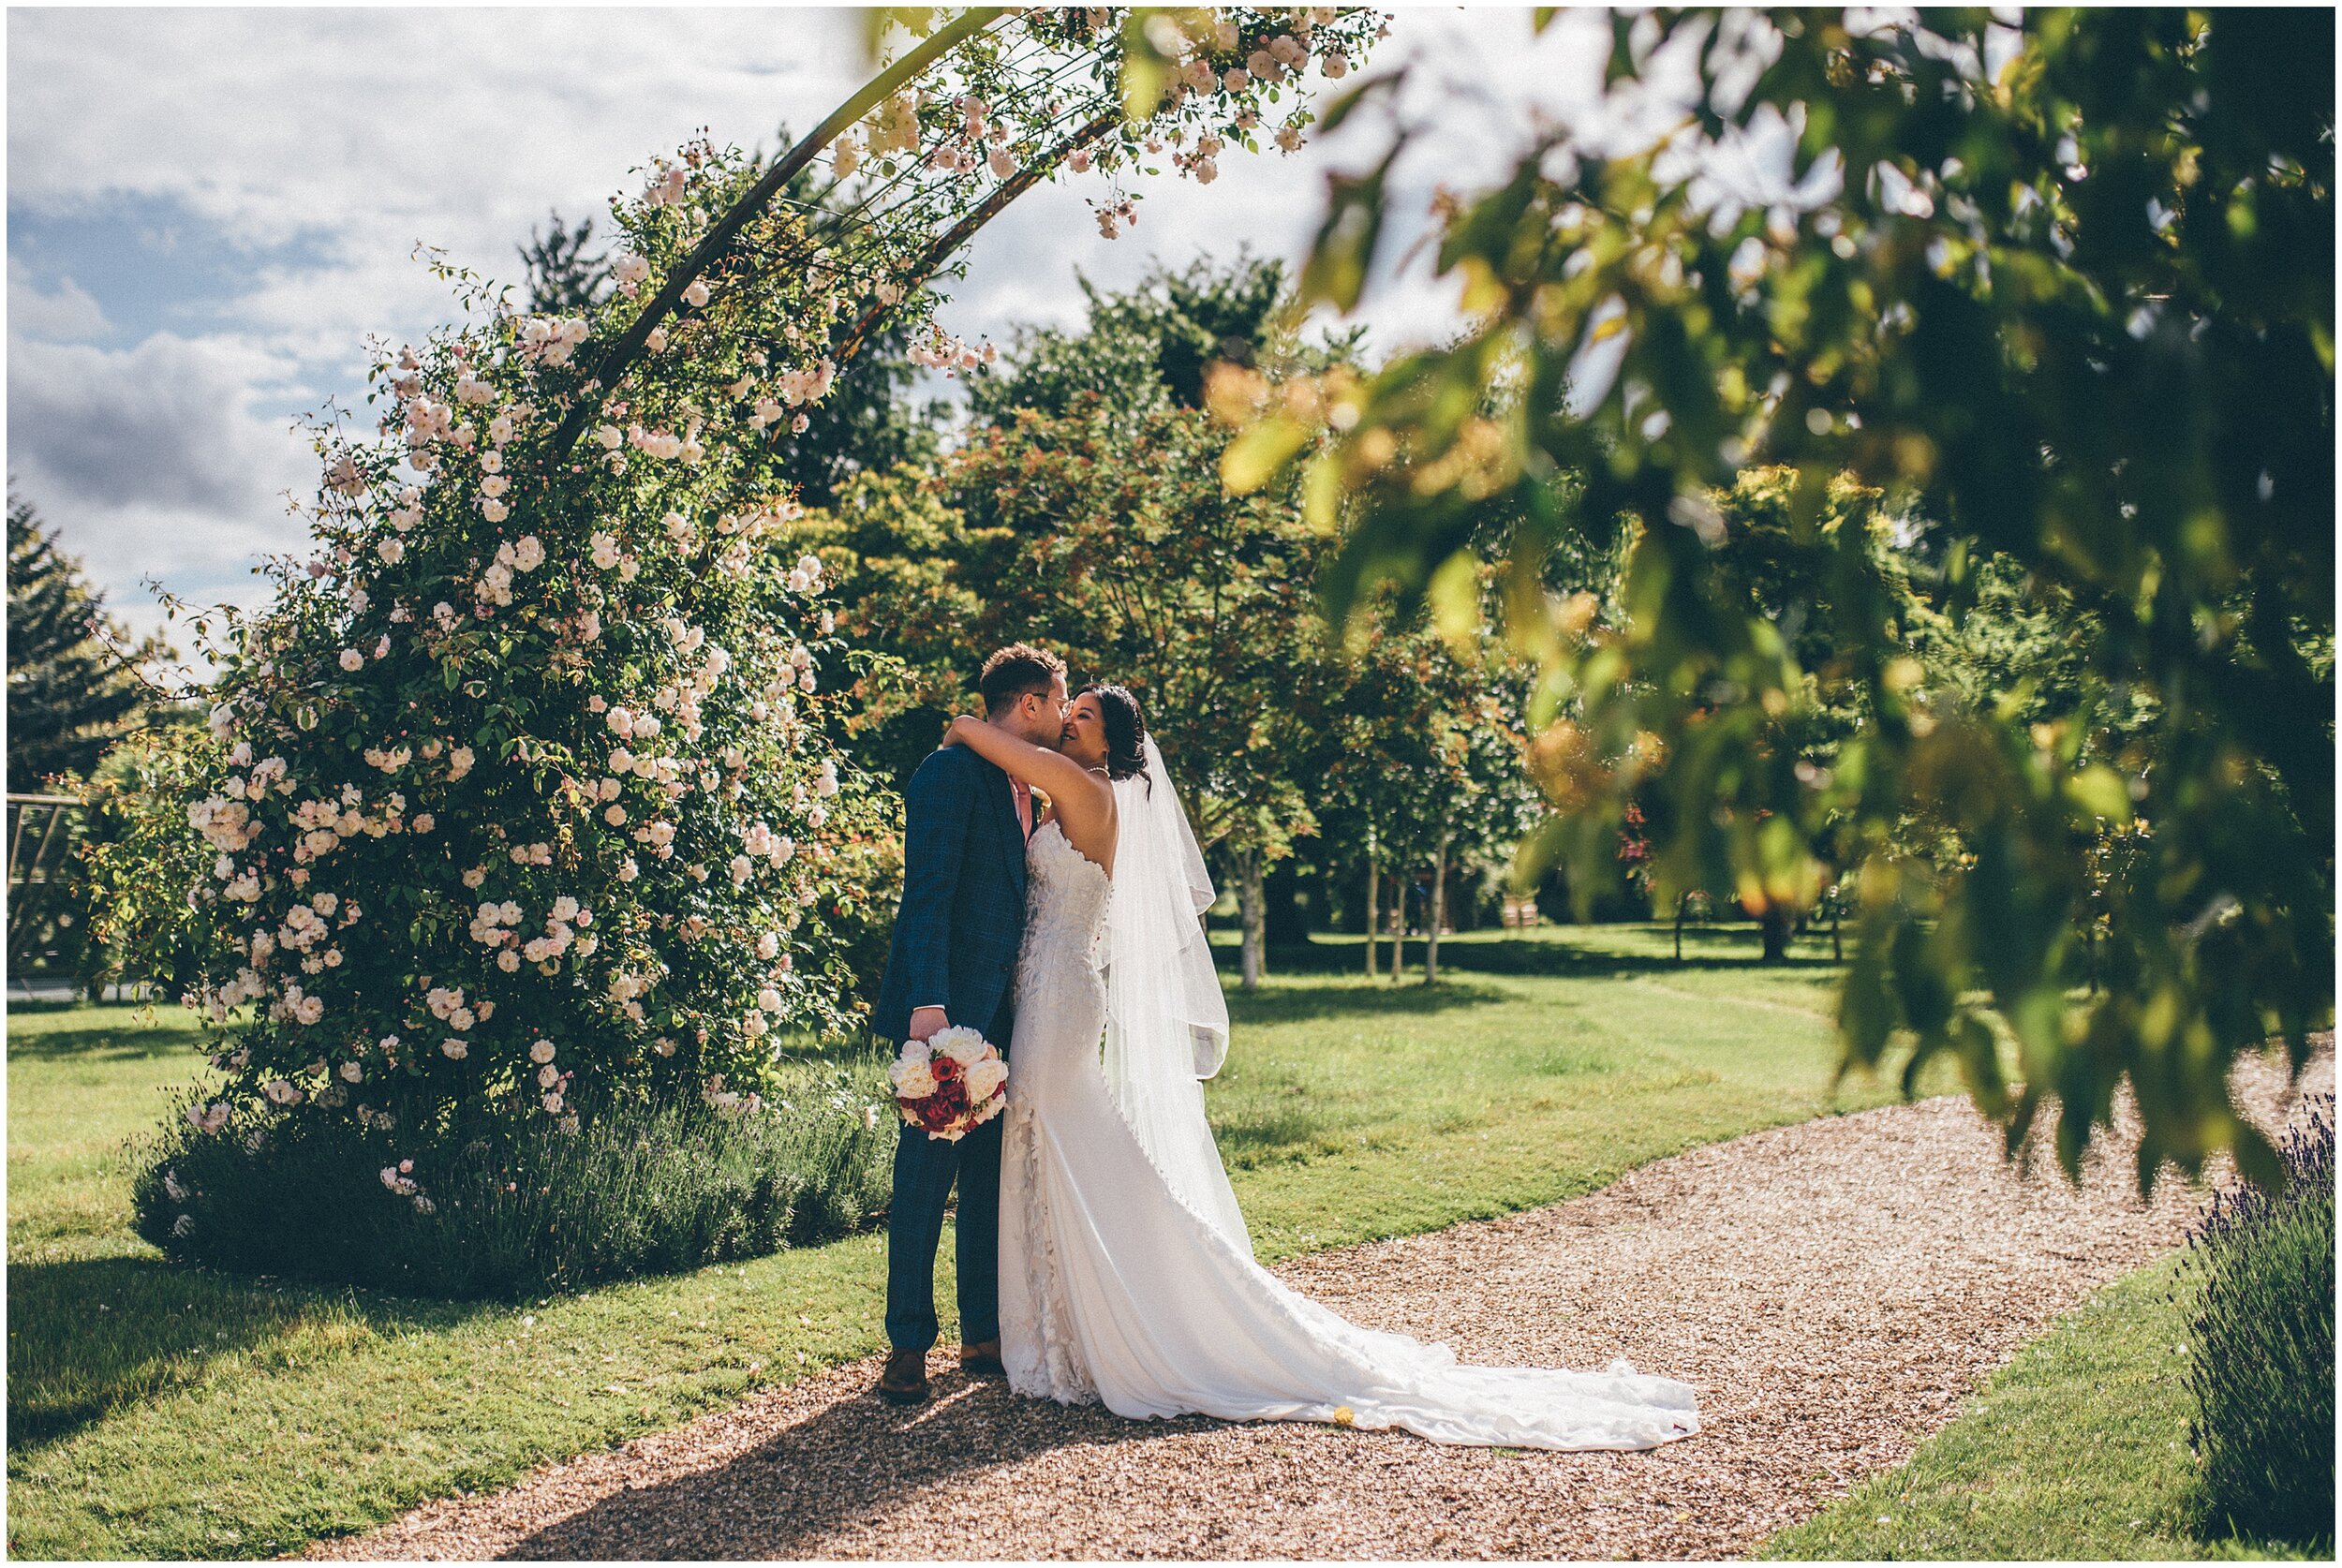 Cute and happy newlyweds at Chippenham Park Gardens.